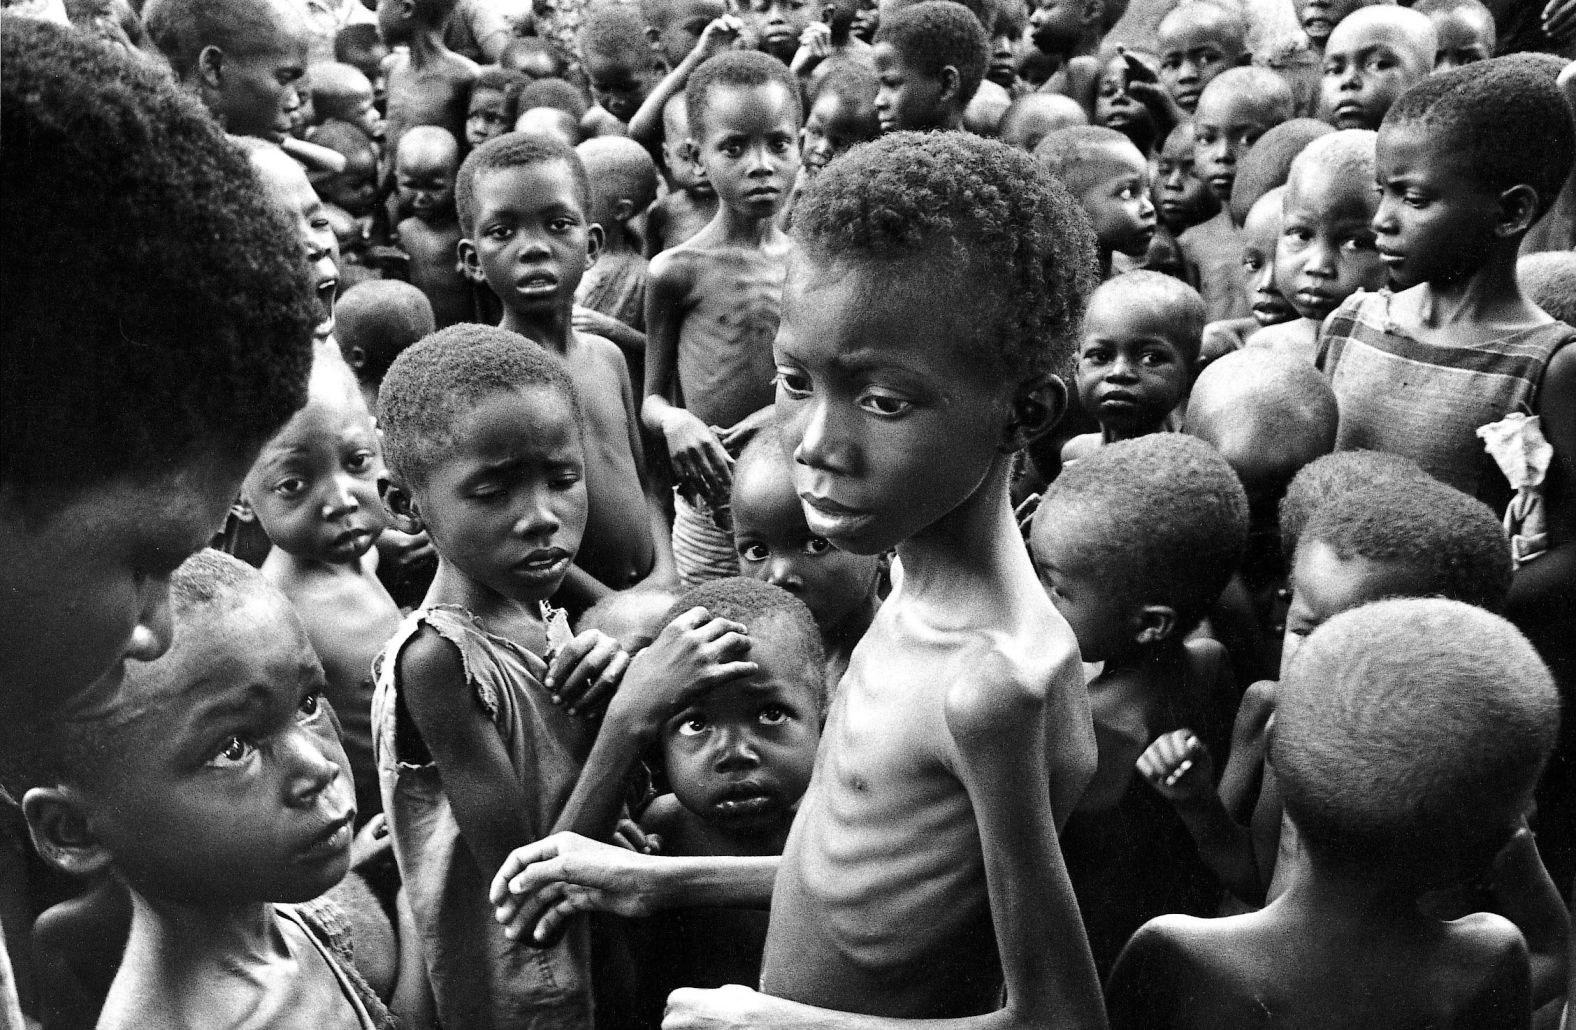 A group of emaciated children photographed in 1970. During the war, the Biafran government reported that Nigeria was using hunger as a weapon to win, and sought aid from the outside world. Nigeria led multiple<a href="https://edition.cnn.com/2020/01/15/africa/biafra-nigeria-civil-war/index.html" target="_blank"> blockades preventing relief materials</a> from getting into Biafra. As a result, thousands of people starved. <br />